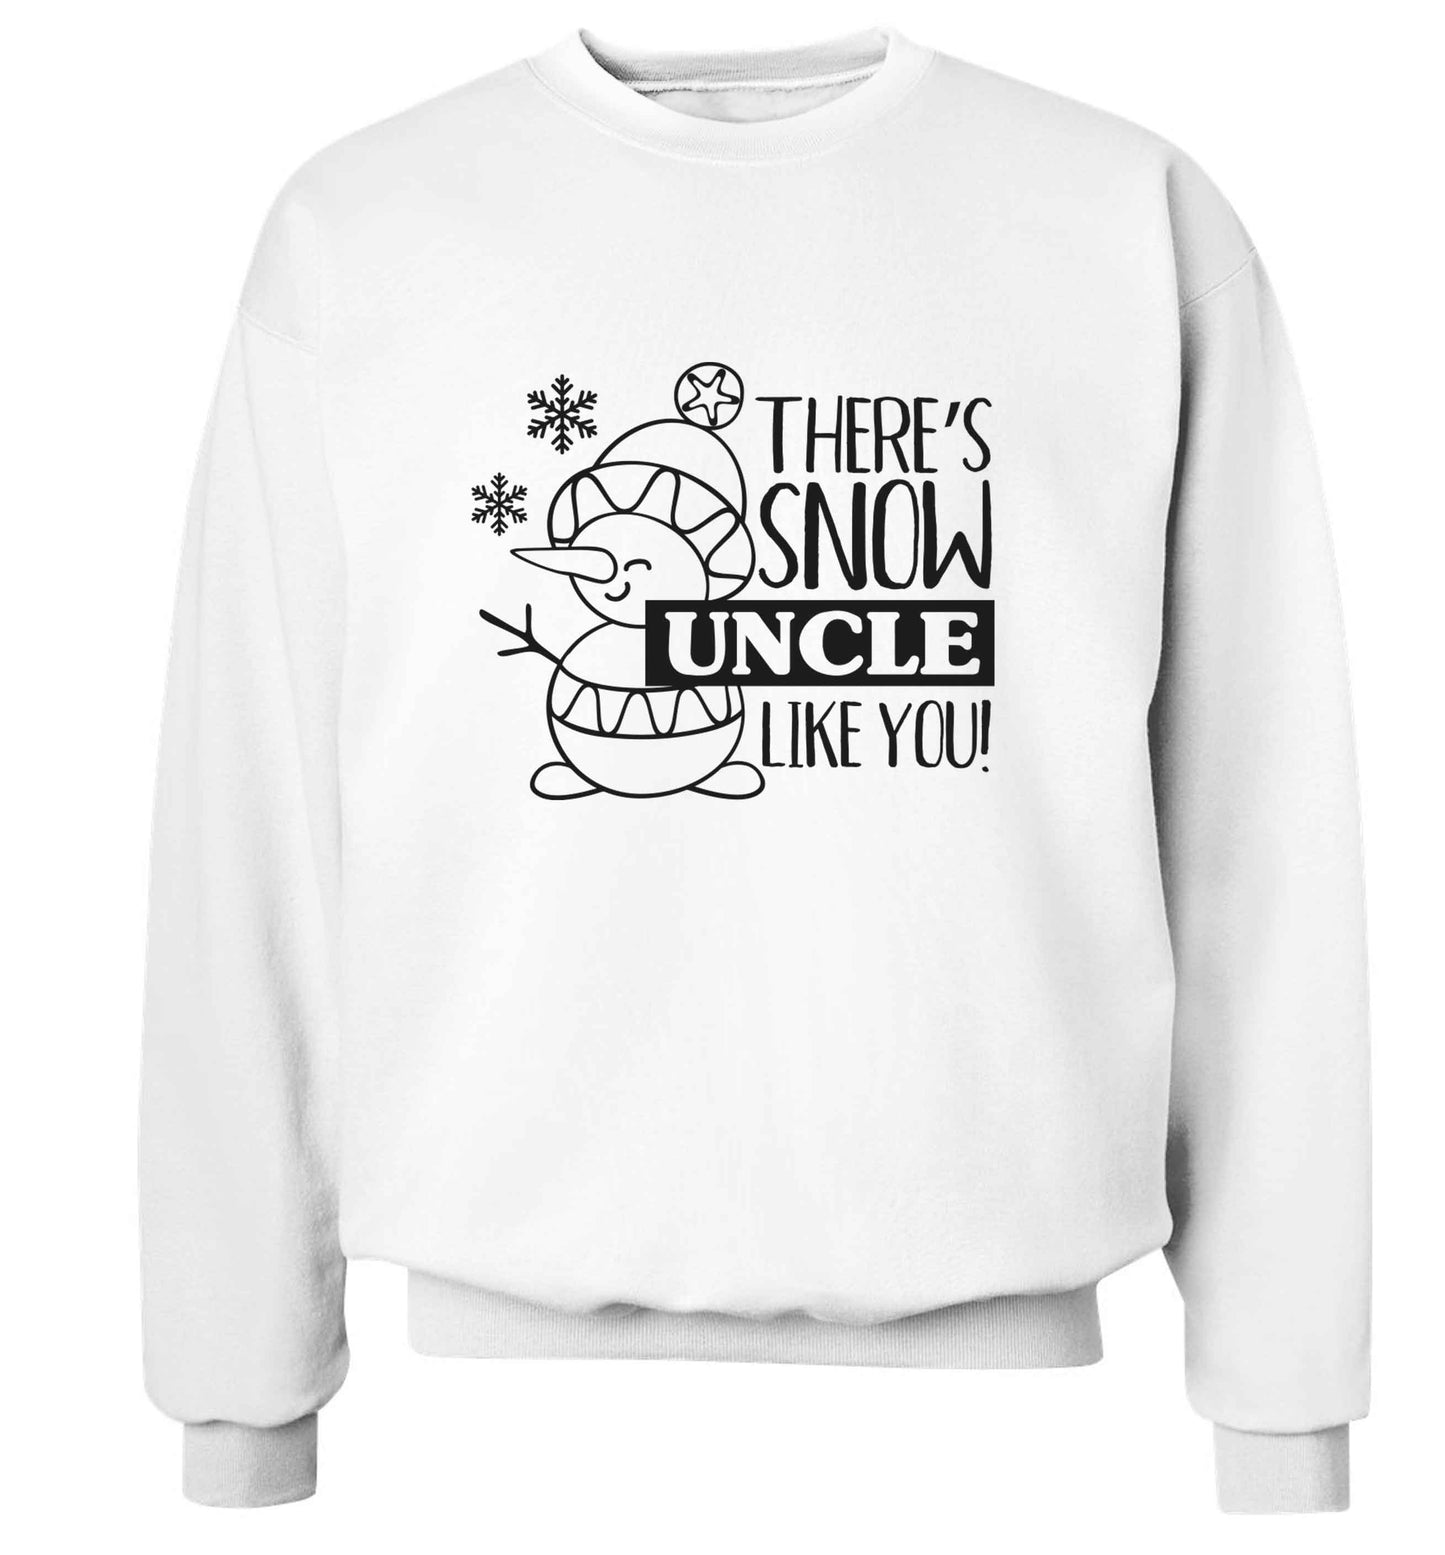 There's snow uncle like you adult's unisex white sweater 2XL